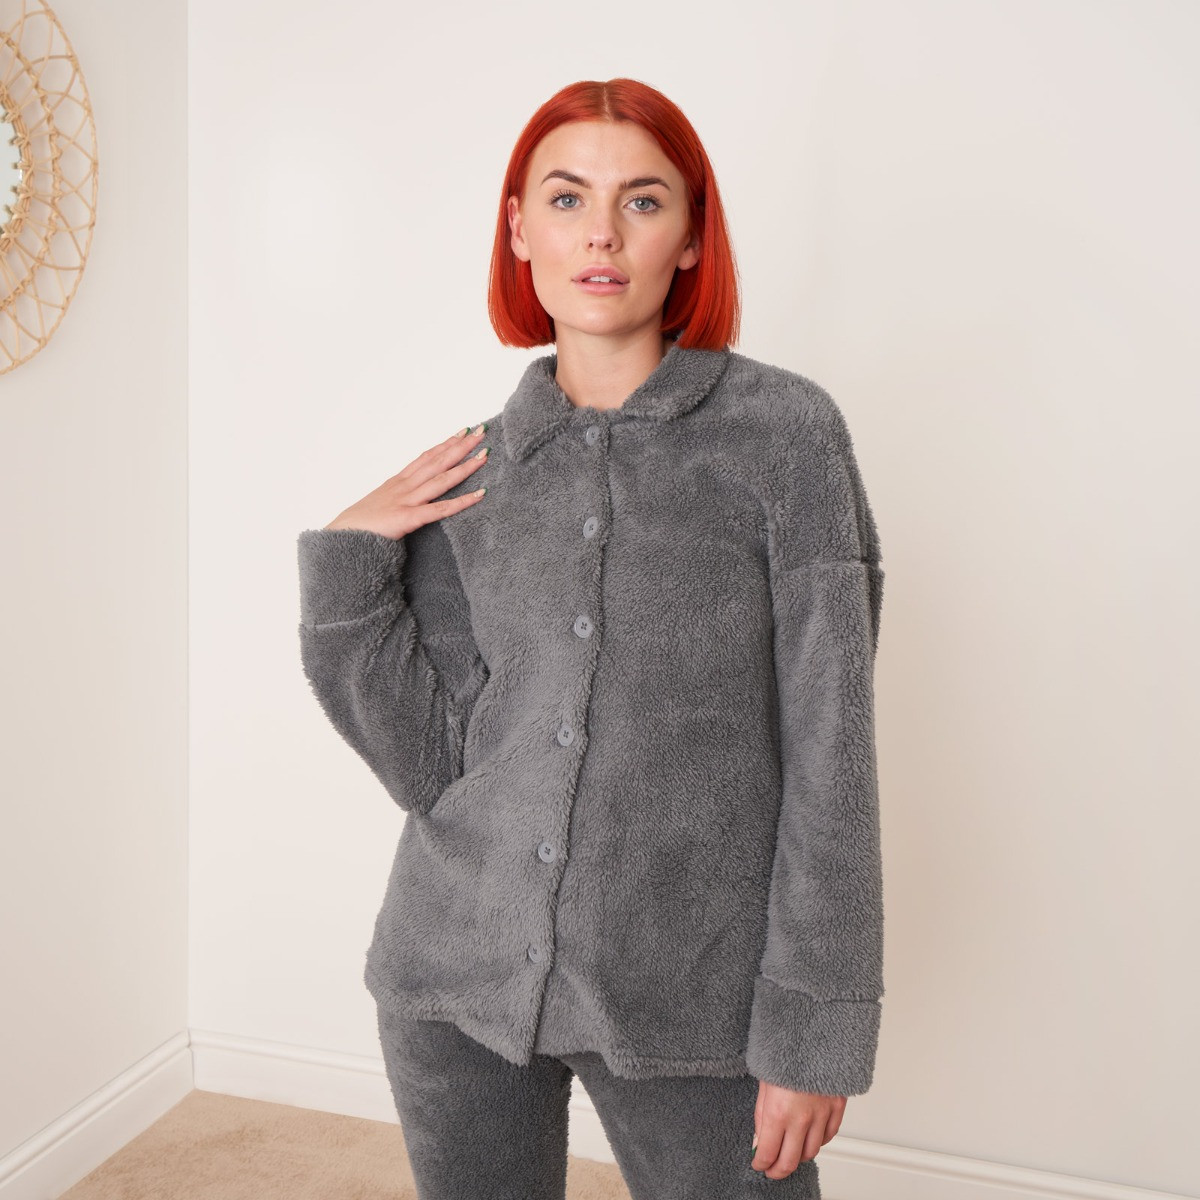 OHS Teddy Button Up Over Shirt - Grey>